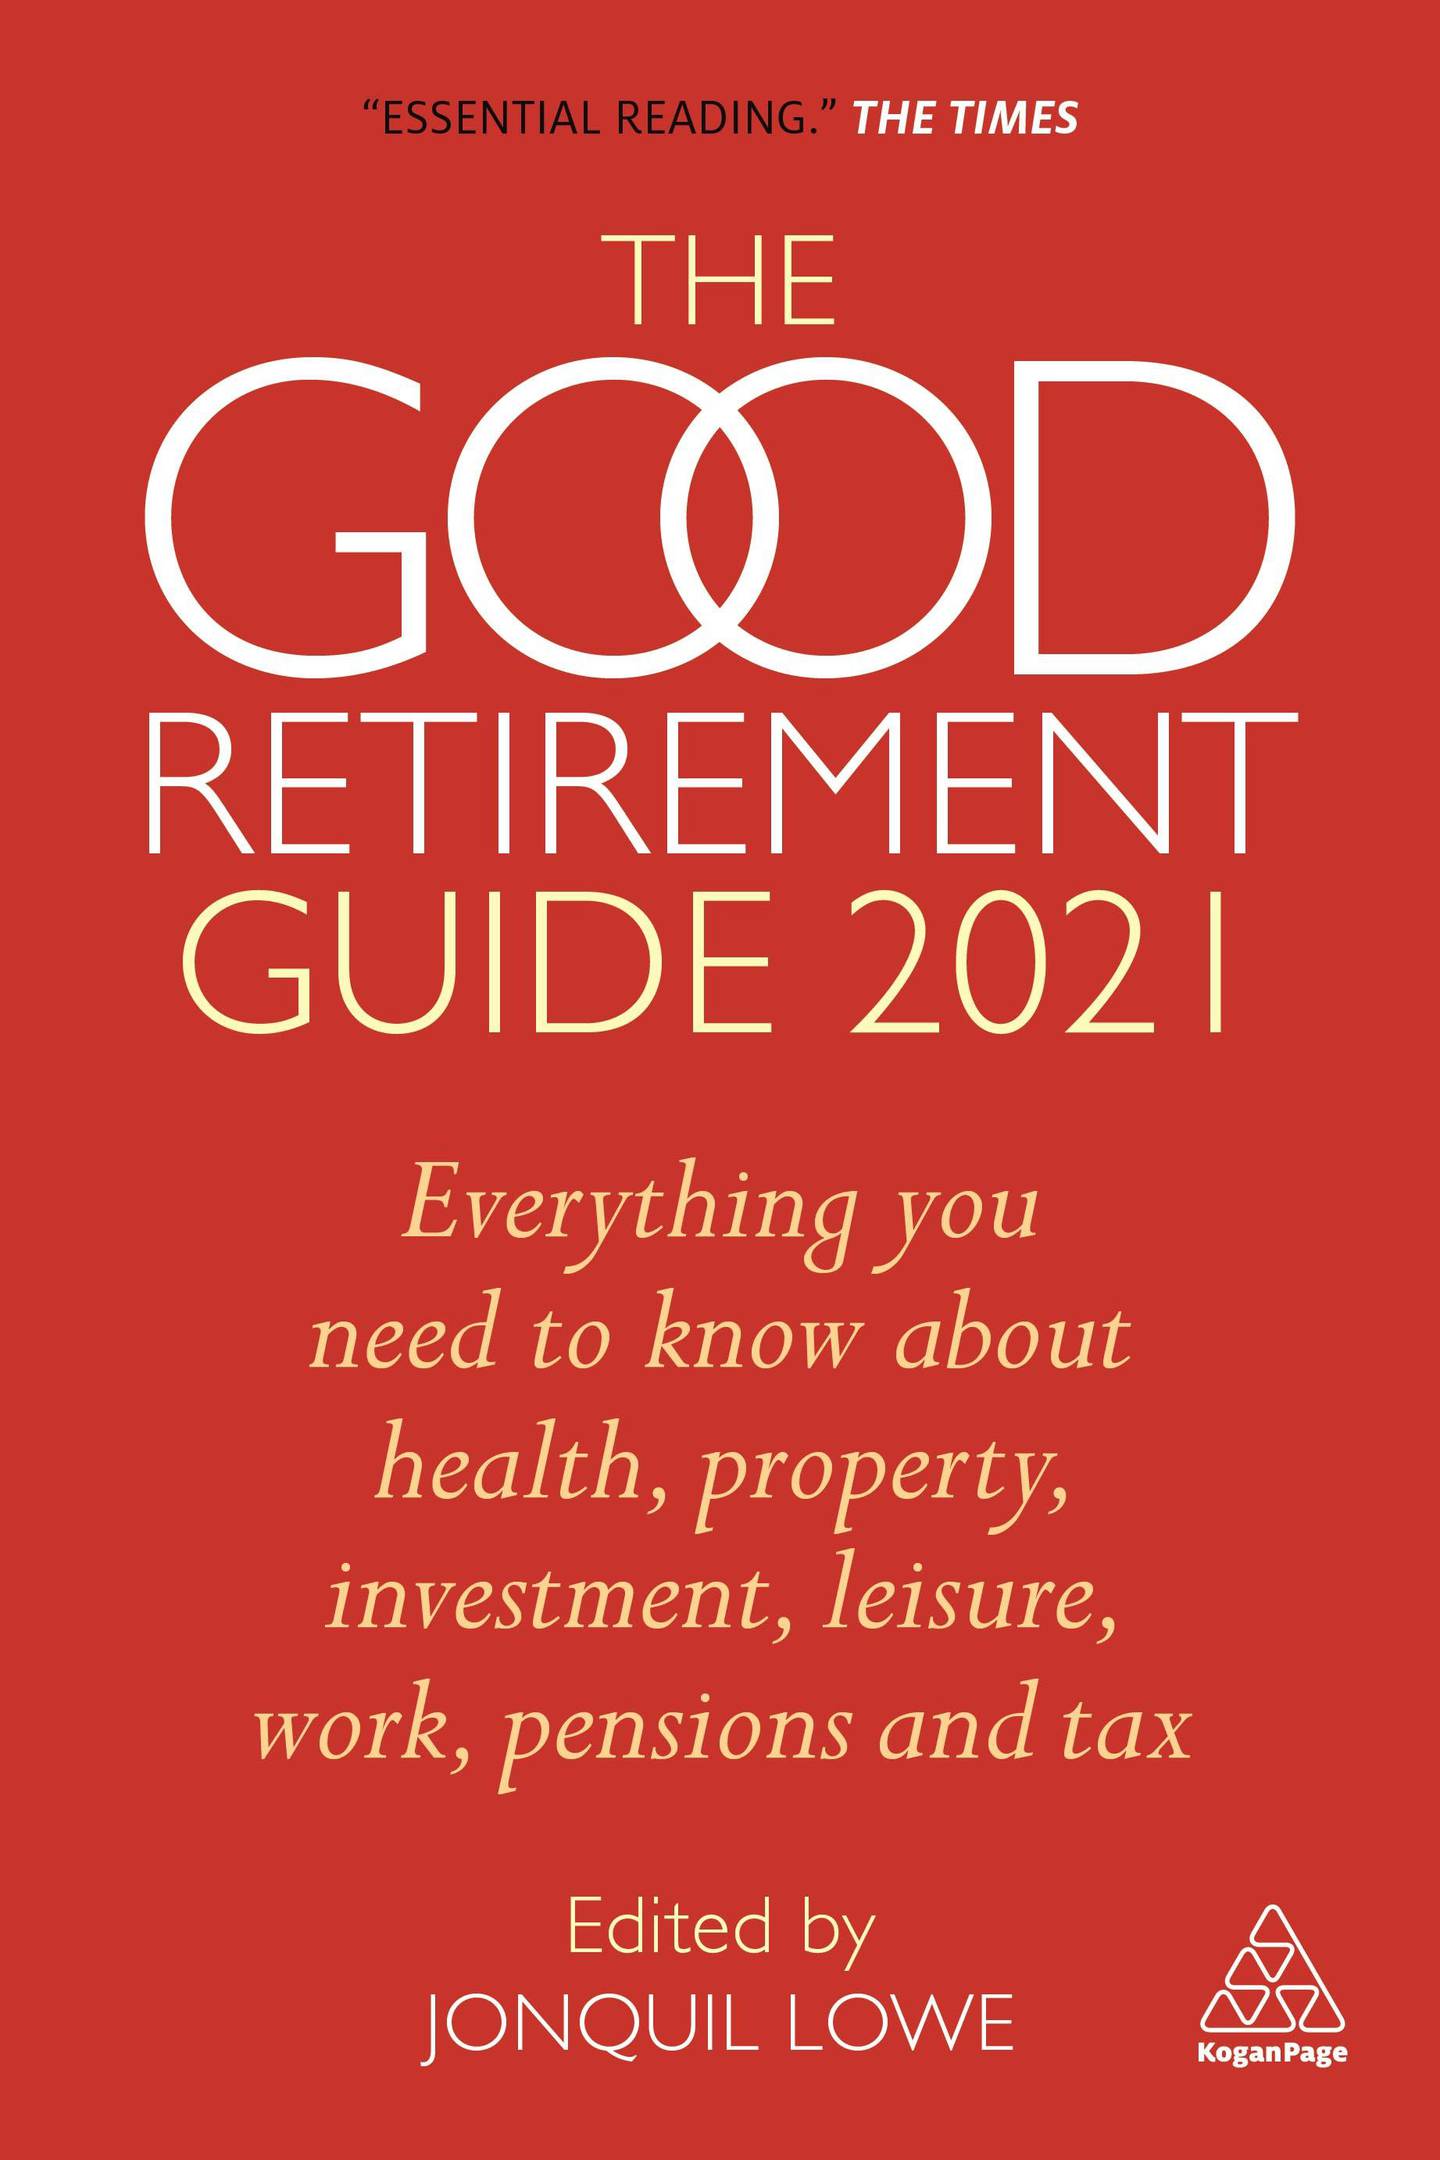 This book contains useful tips and insights that anyone thinking about their retirement will find useful, whether it is tax and healthcare matters, starting a business or looking after your elderly parents. Courtesy: Jonquil Lowe